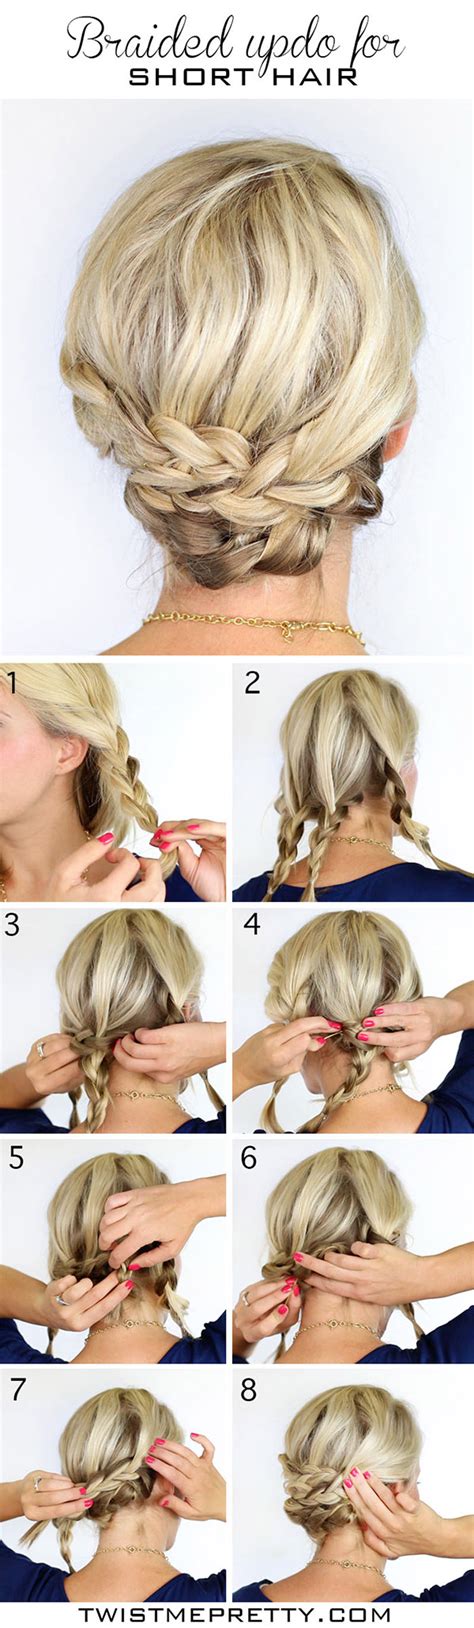 Cool hair ideas for adults and teens, girls. 20 DIY Wedding Hairstyles with Tutorials to Try on Your Own - Elegantweddinginvites.com Blog